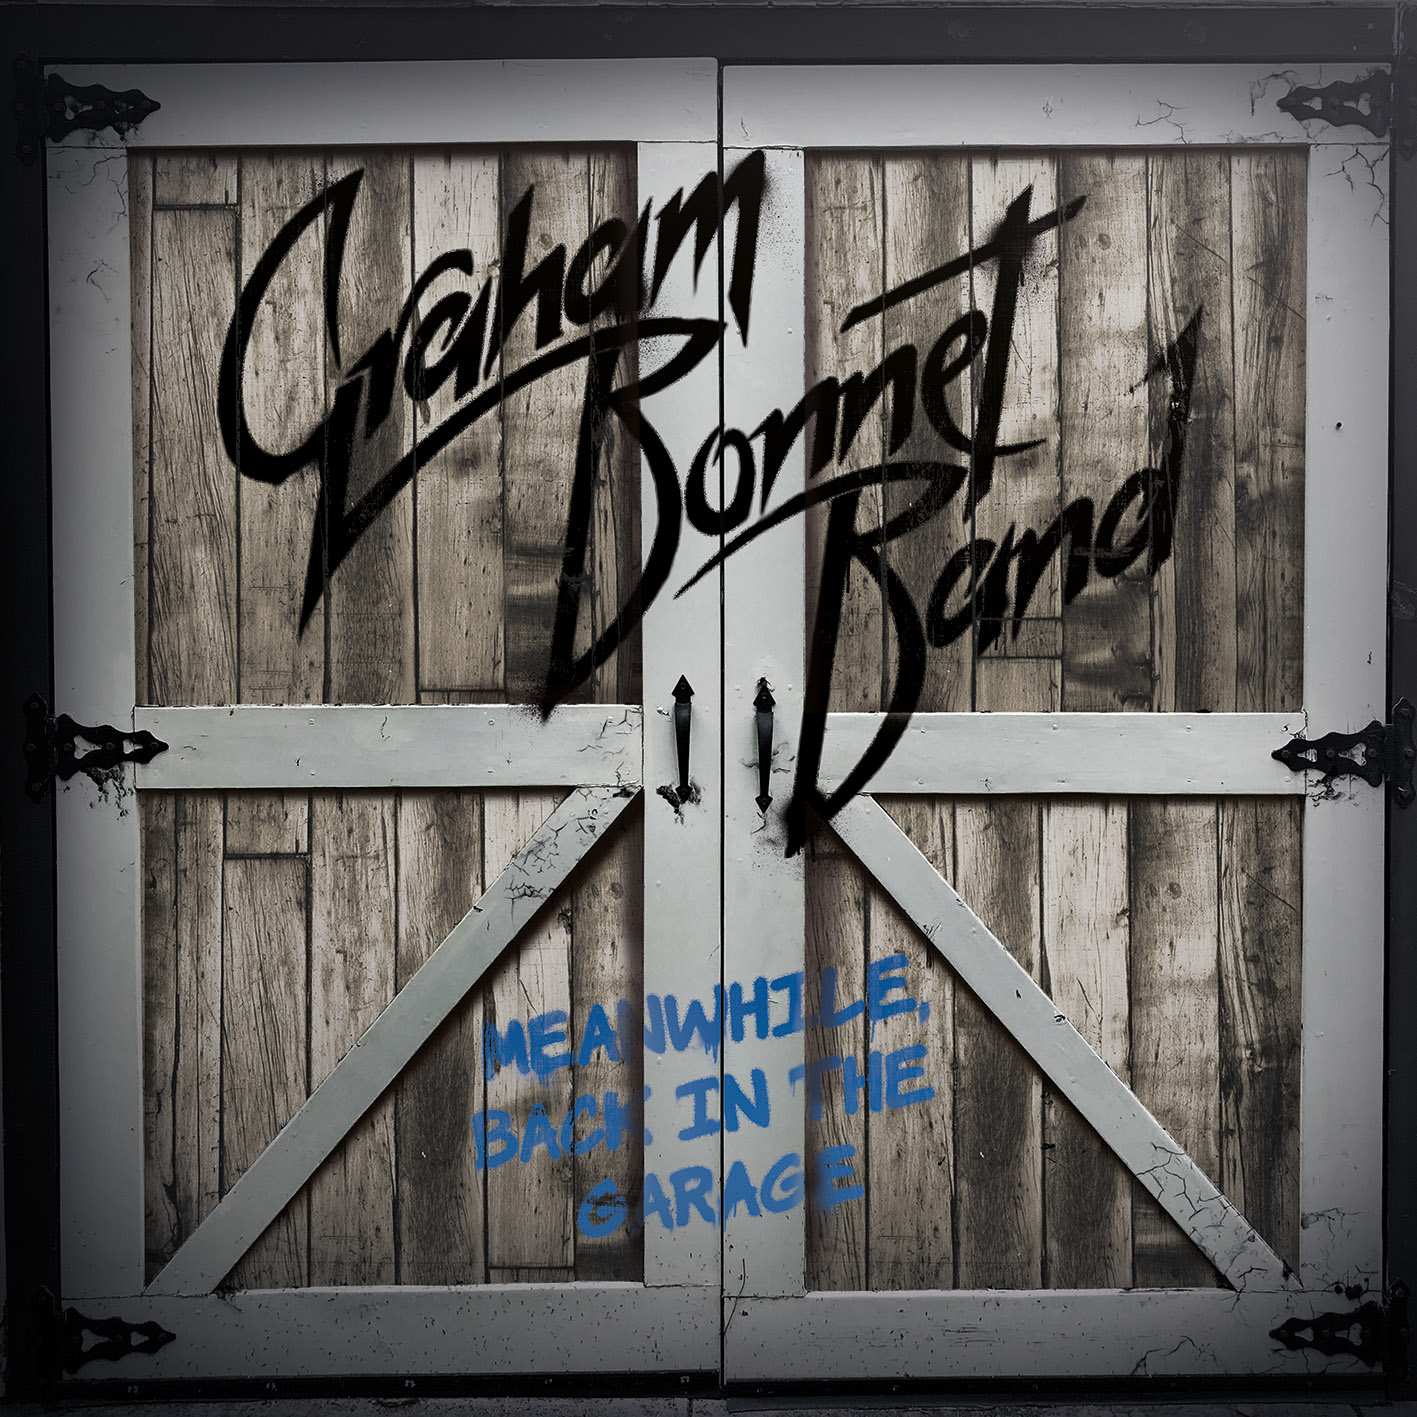 GRAHAM BONNET BAND – Meanwhile, Back in the Garage